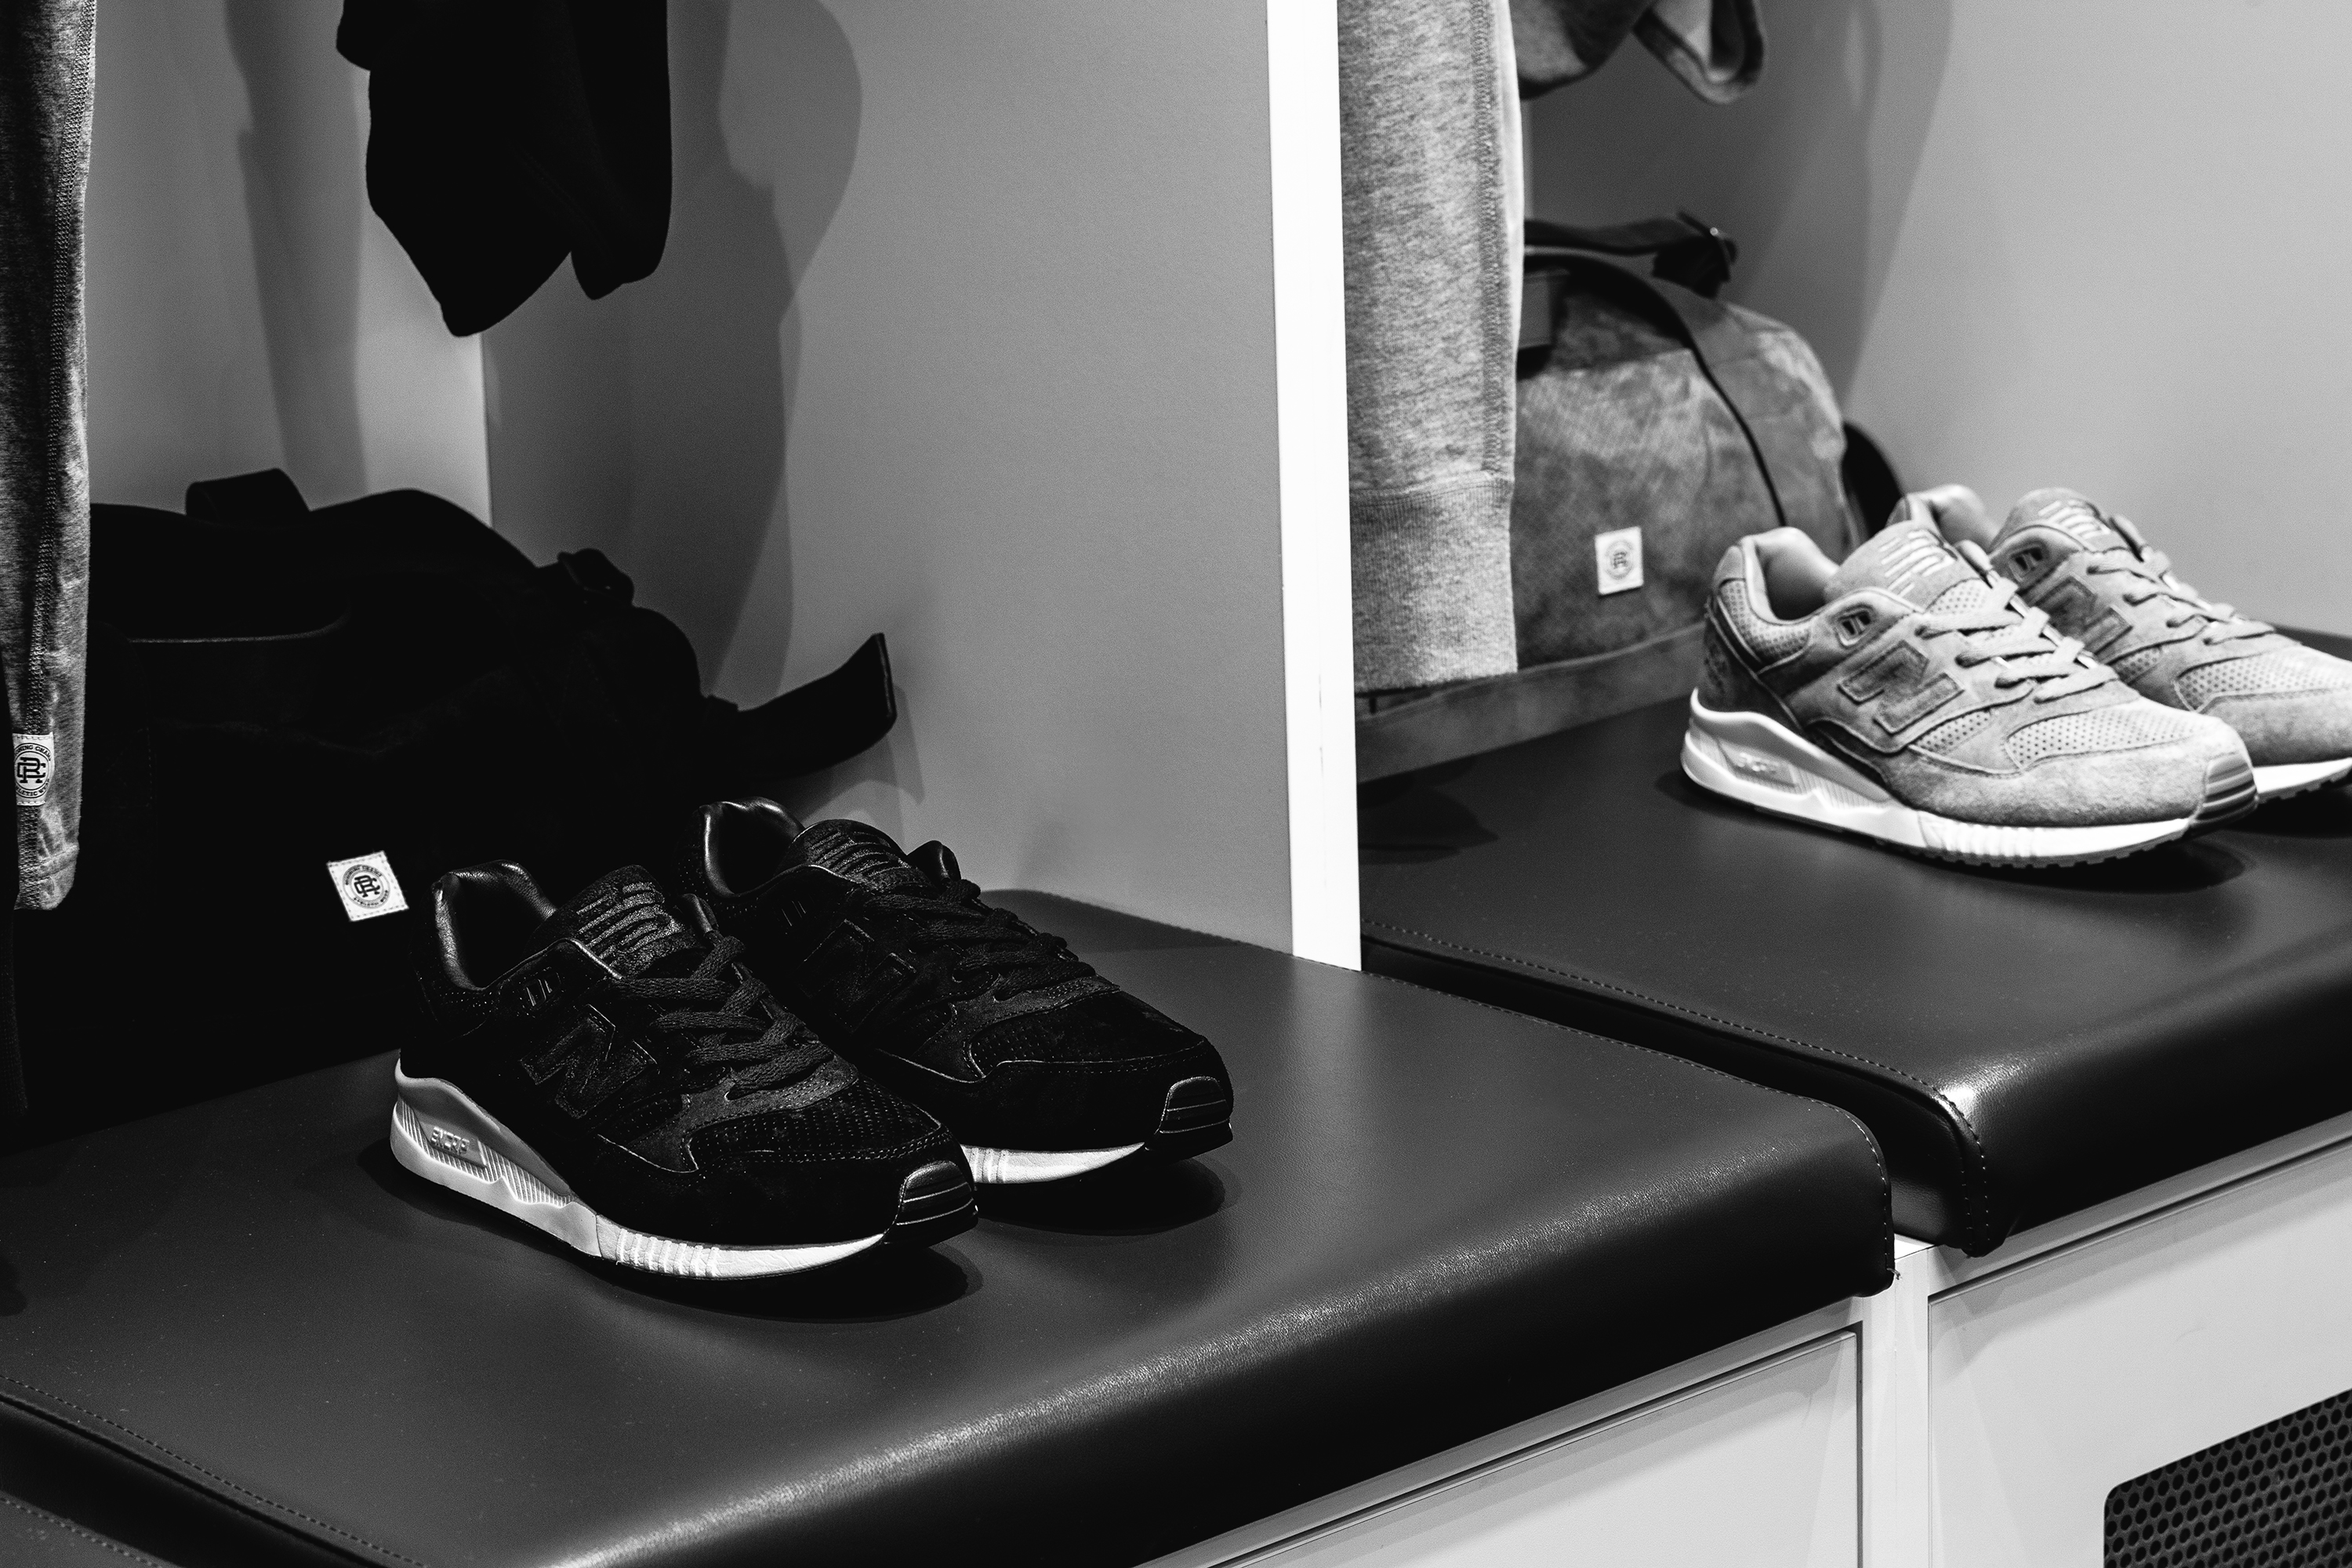 New Balance 530 x Reigning Champ “Gym Pack” | New Balance Gallery